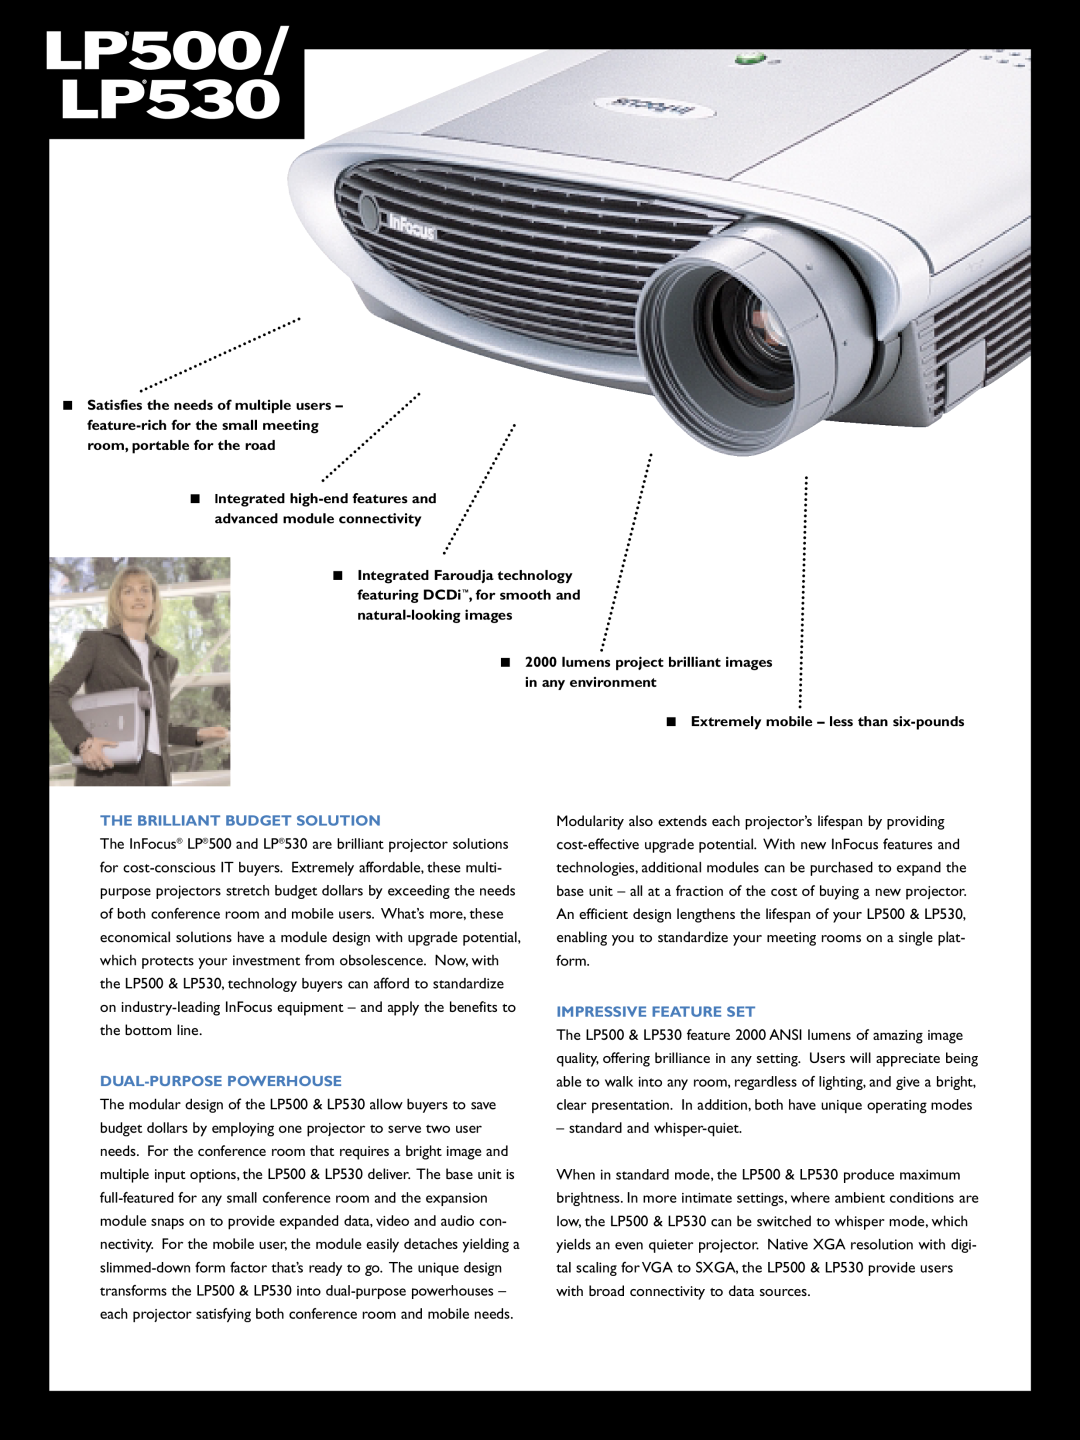 InFocus LP500, LP530 manual Satisfies the needs of multiple users, lumens project brilliant images in any environment 